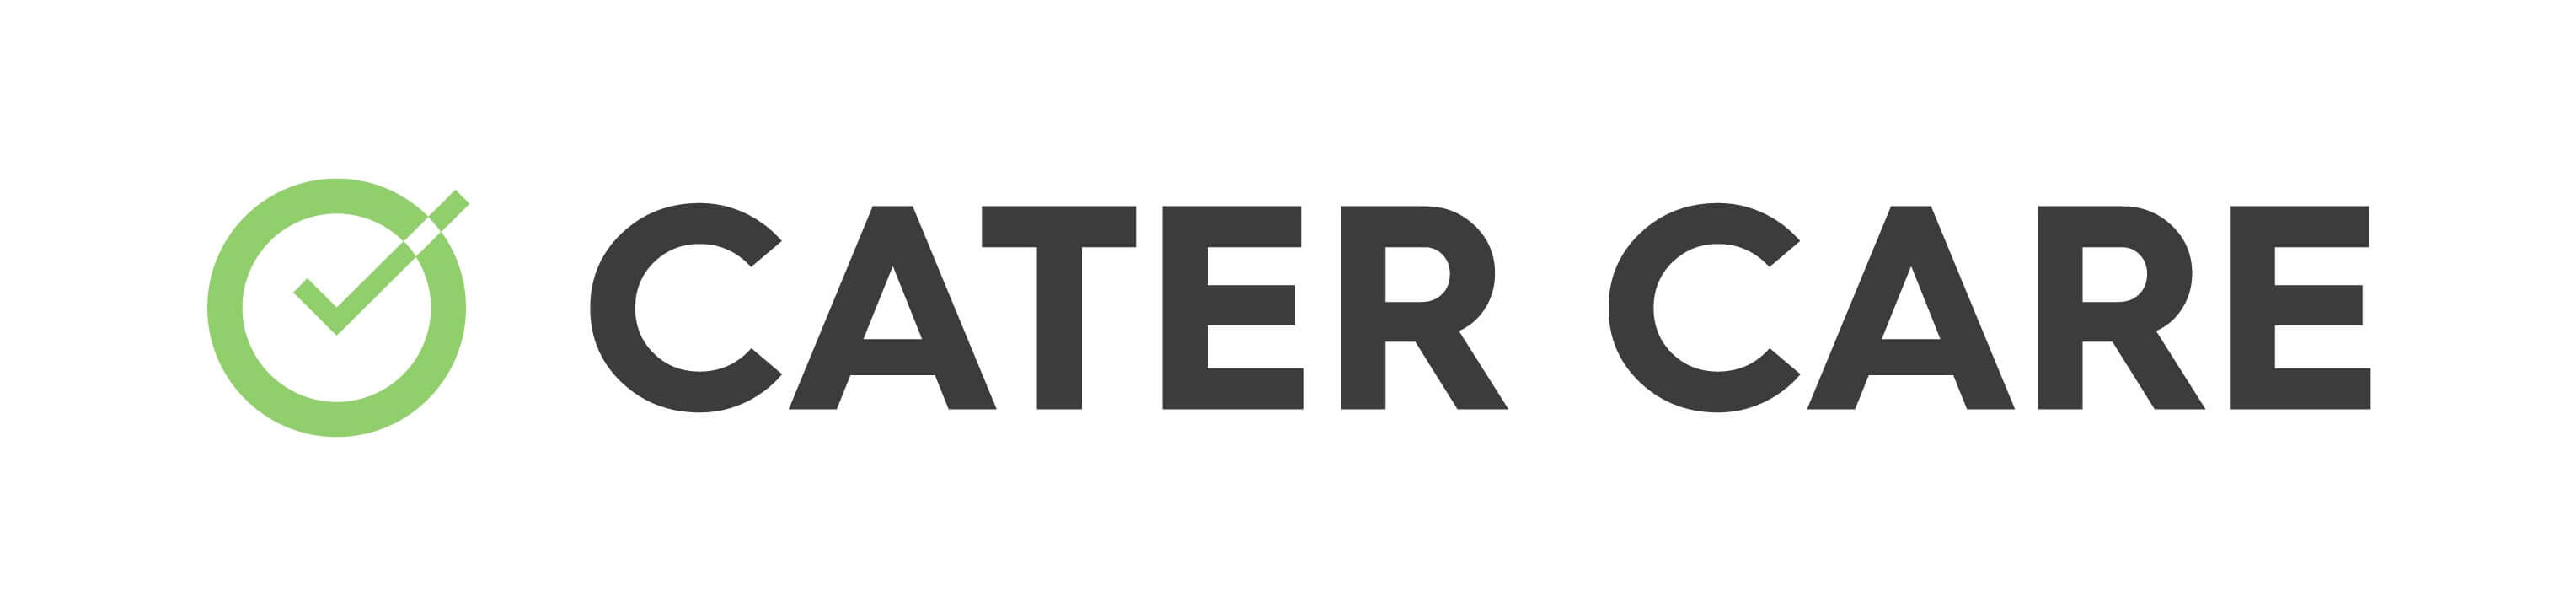 Cater Care Logo